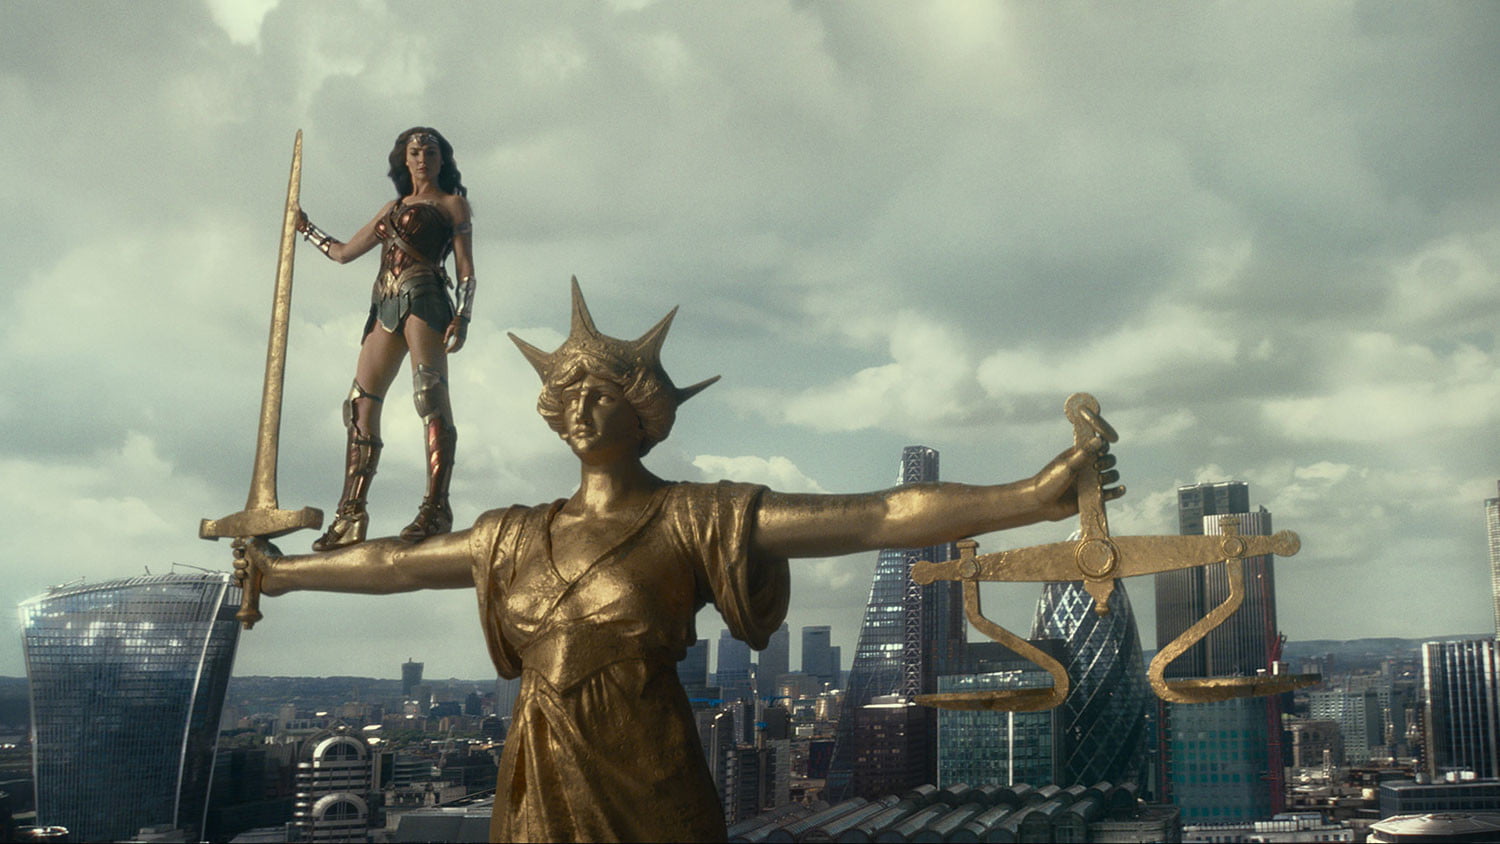 Wonder Woman (Gal Gadot) stands atop a statue of Justice in London in the Justice League movie